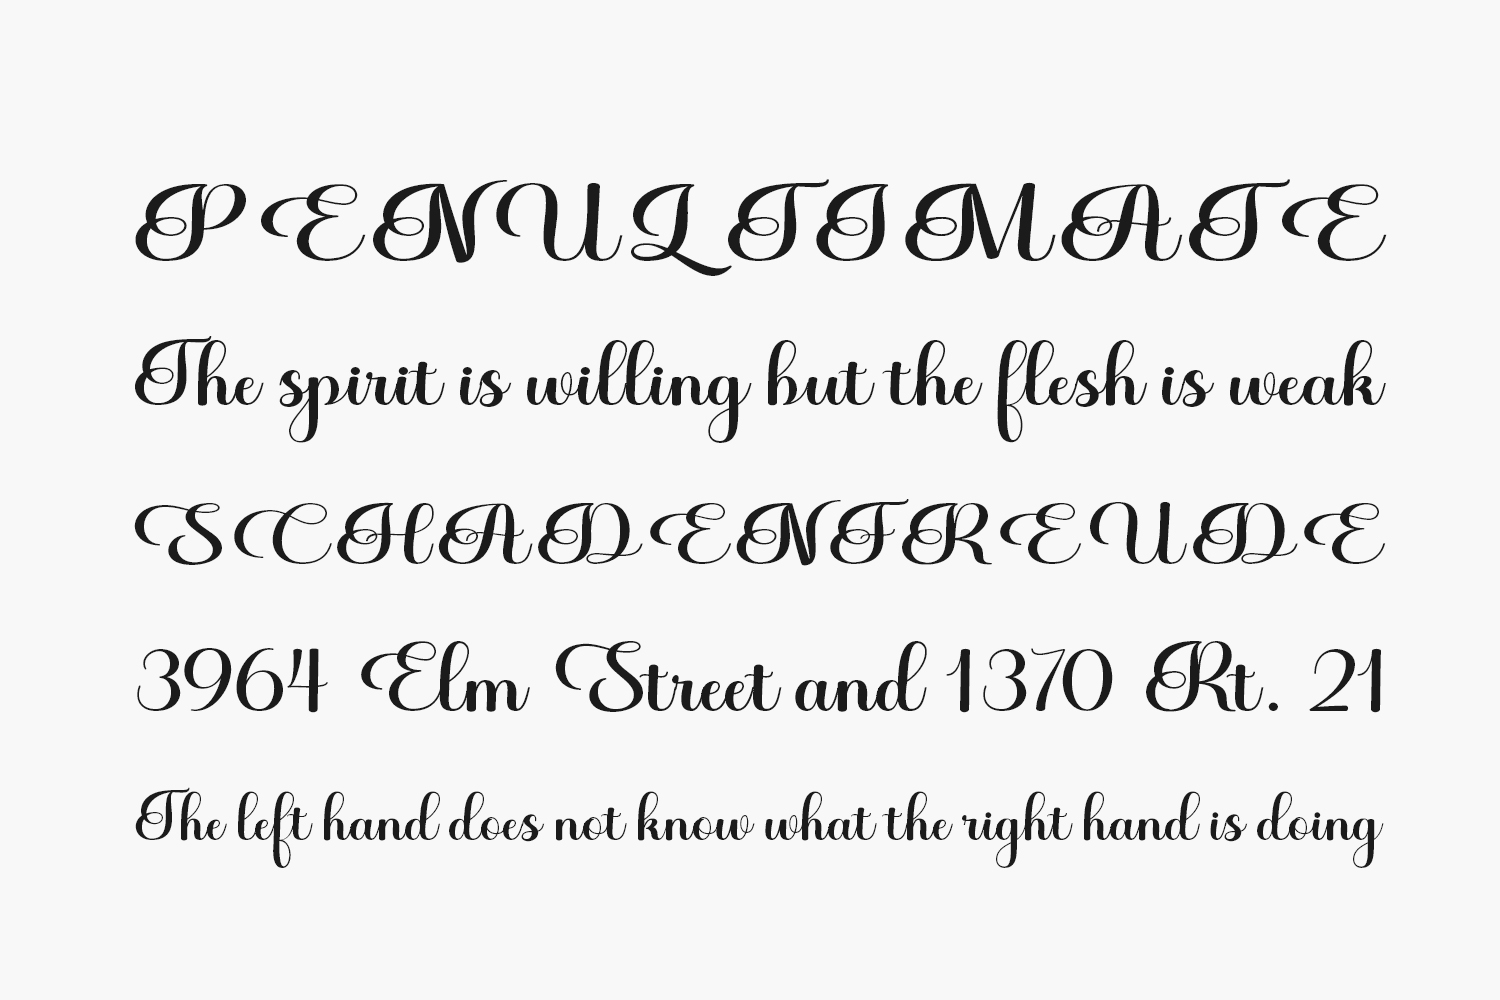 Greating Free Font